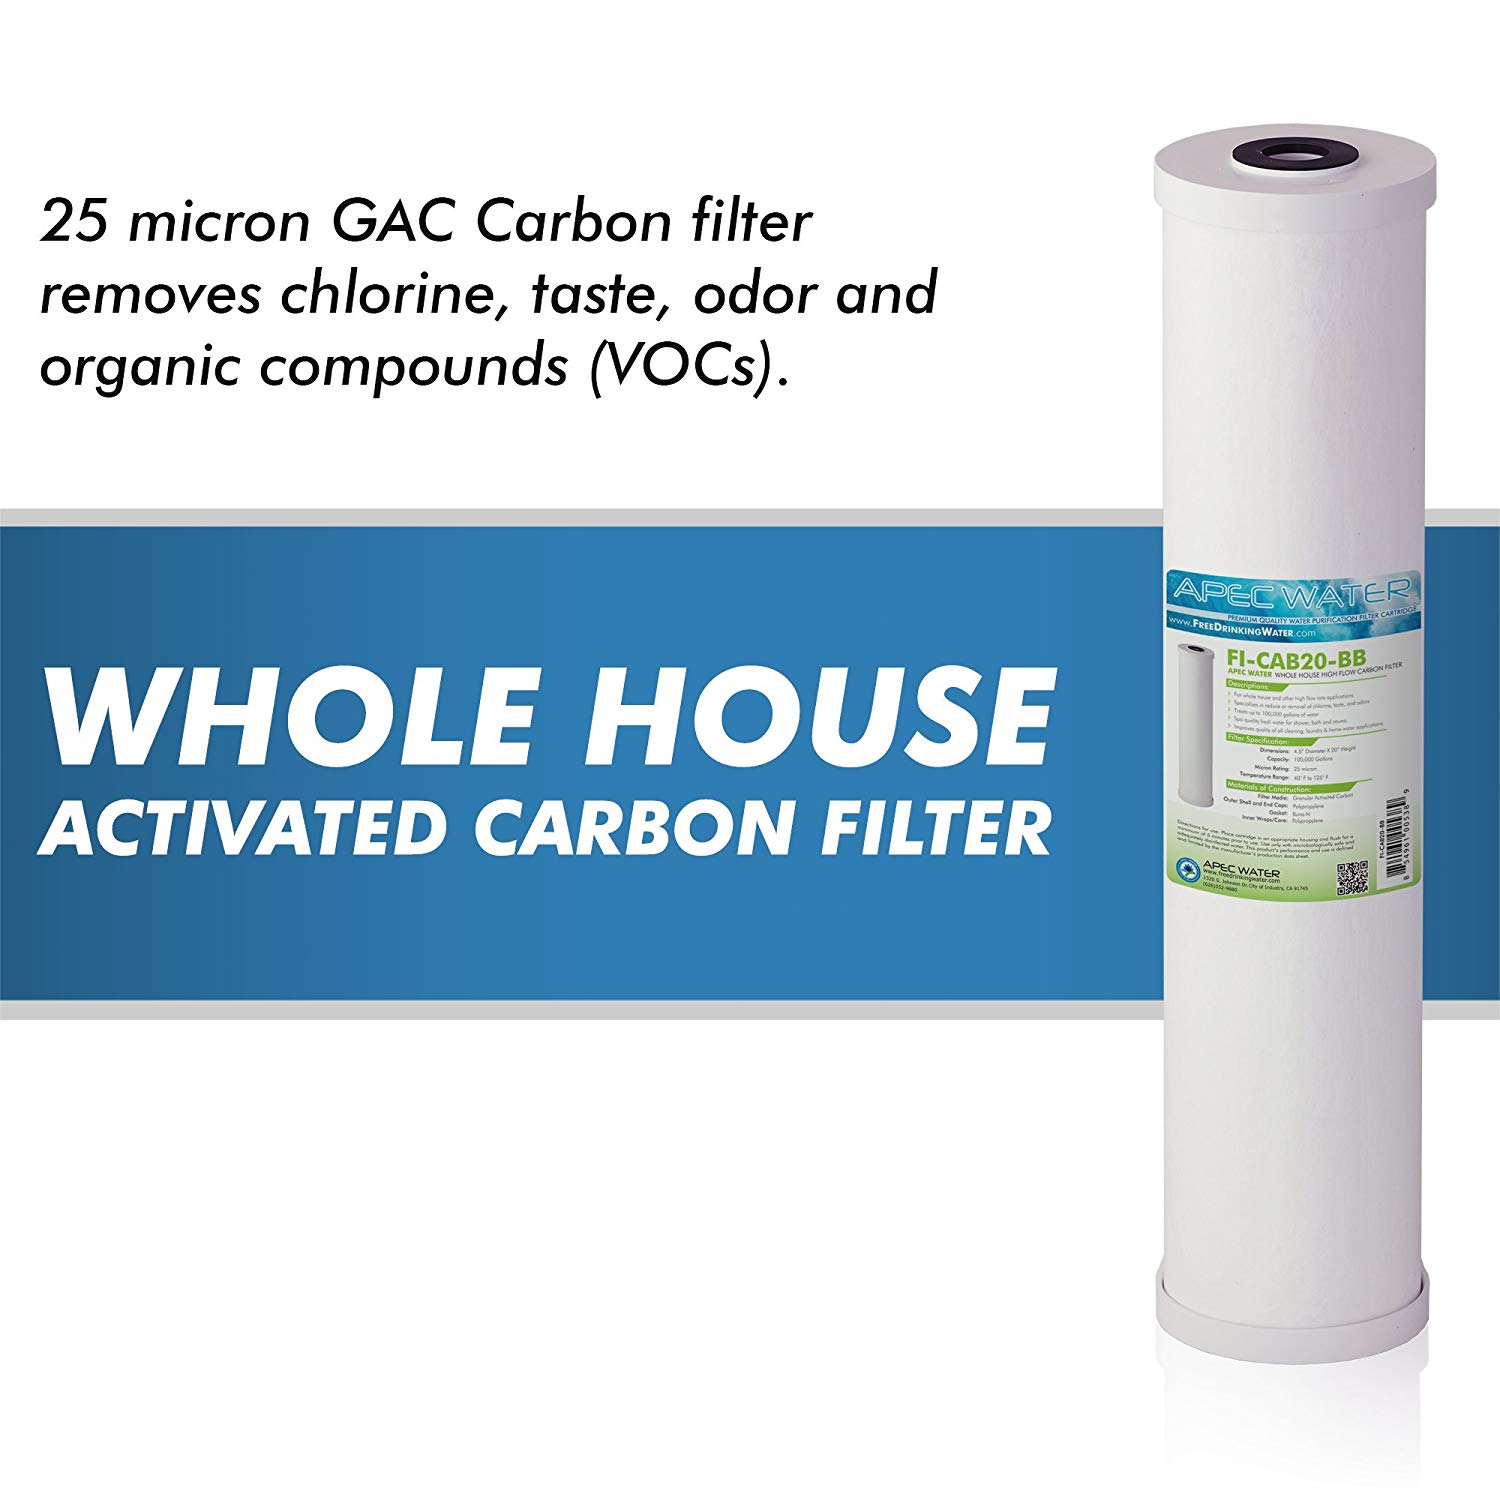 APEC Water High Flow FI-CAB20-BB 20-in Gac Whole House Replacement